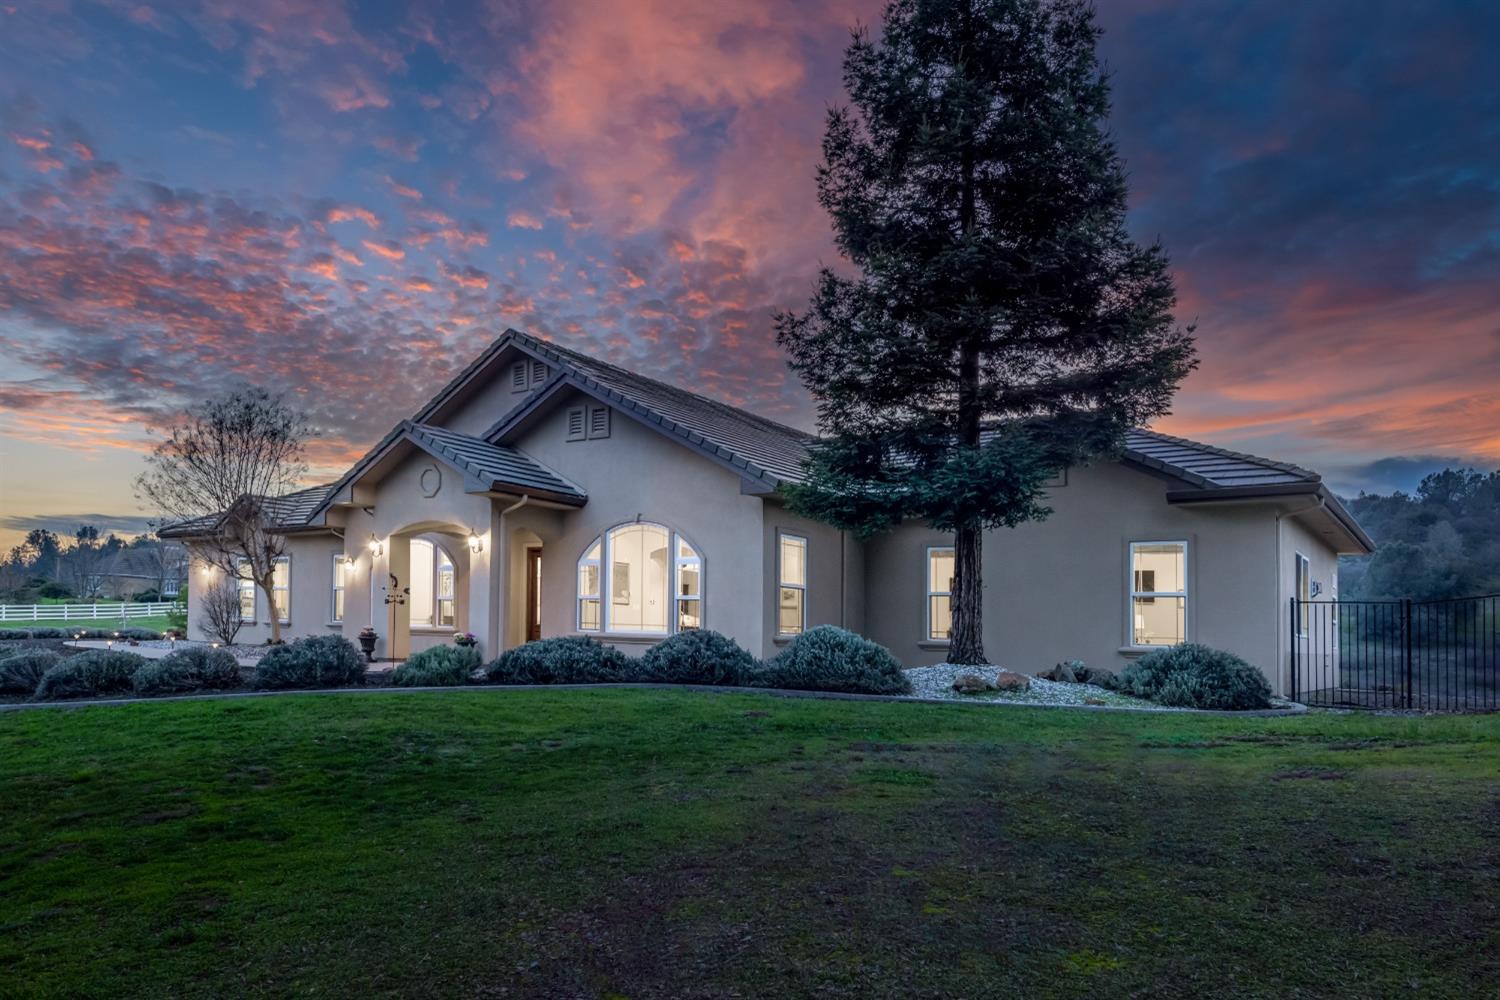 Photo of 5664 Amber Fields Dr in Shingle Springs, CA